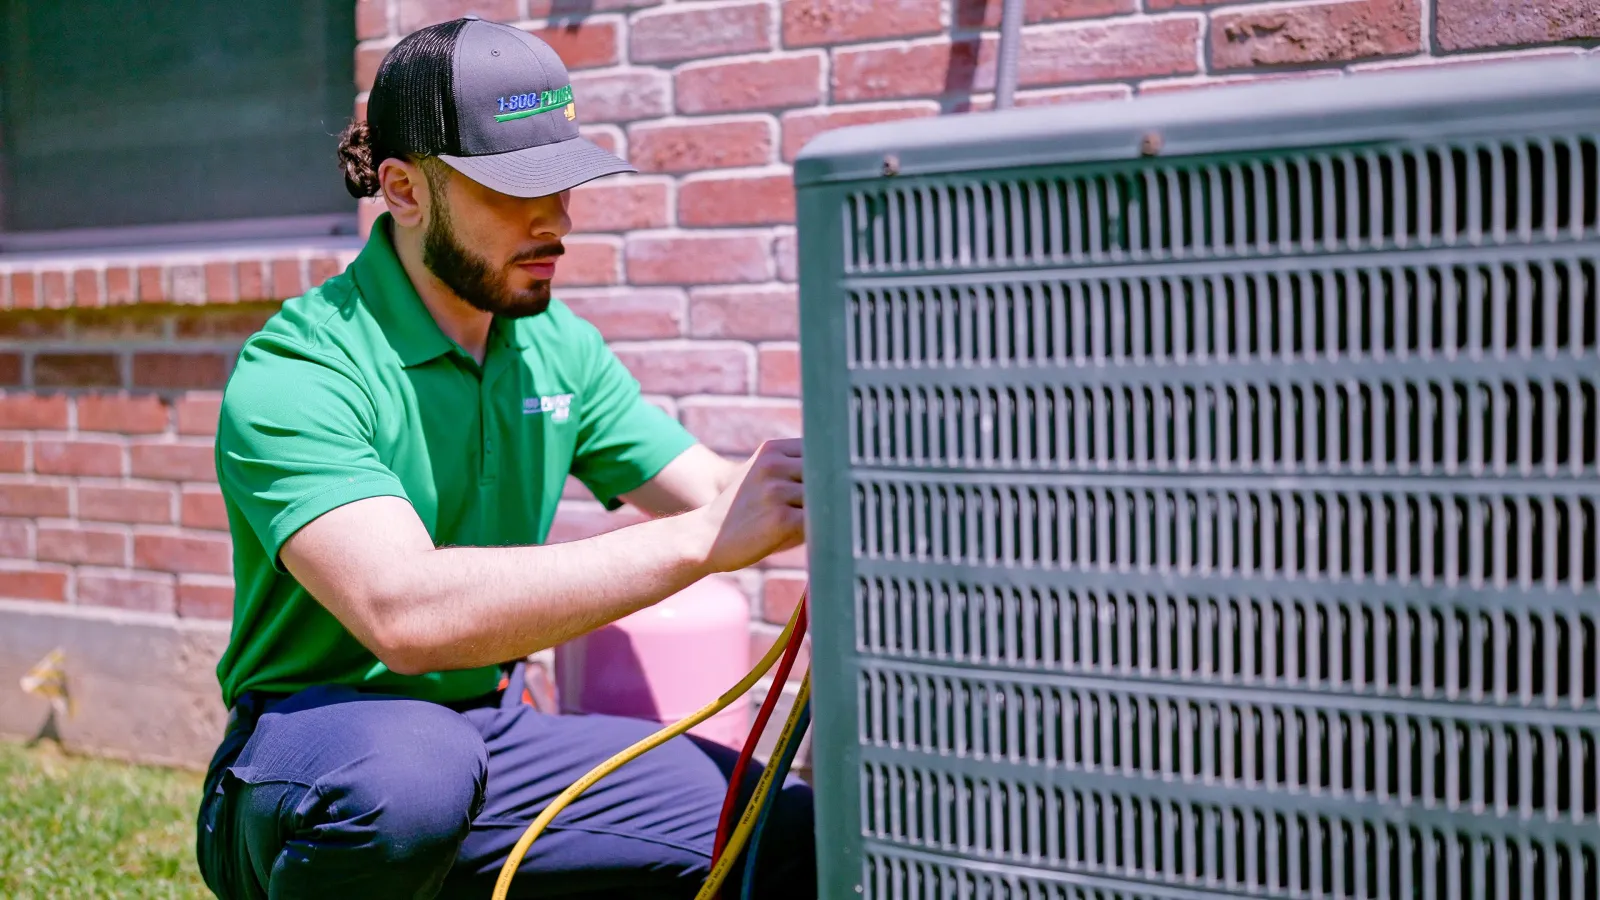 A Raleigh AC technician repairs an outdoor air conditioning unit